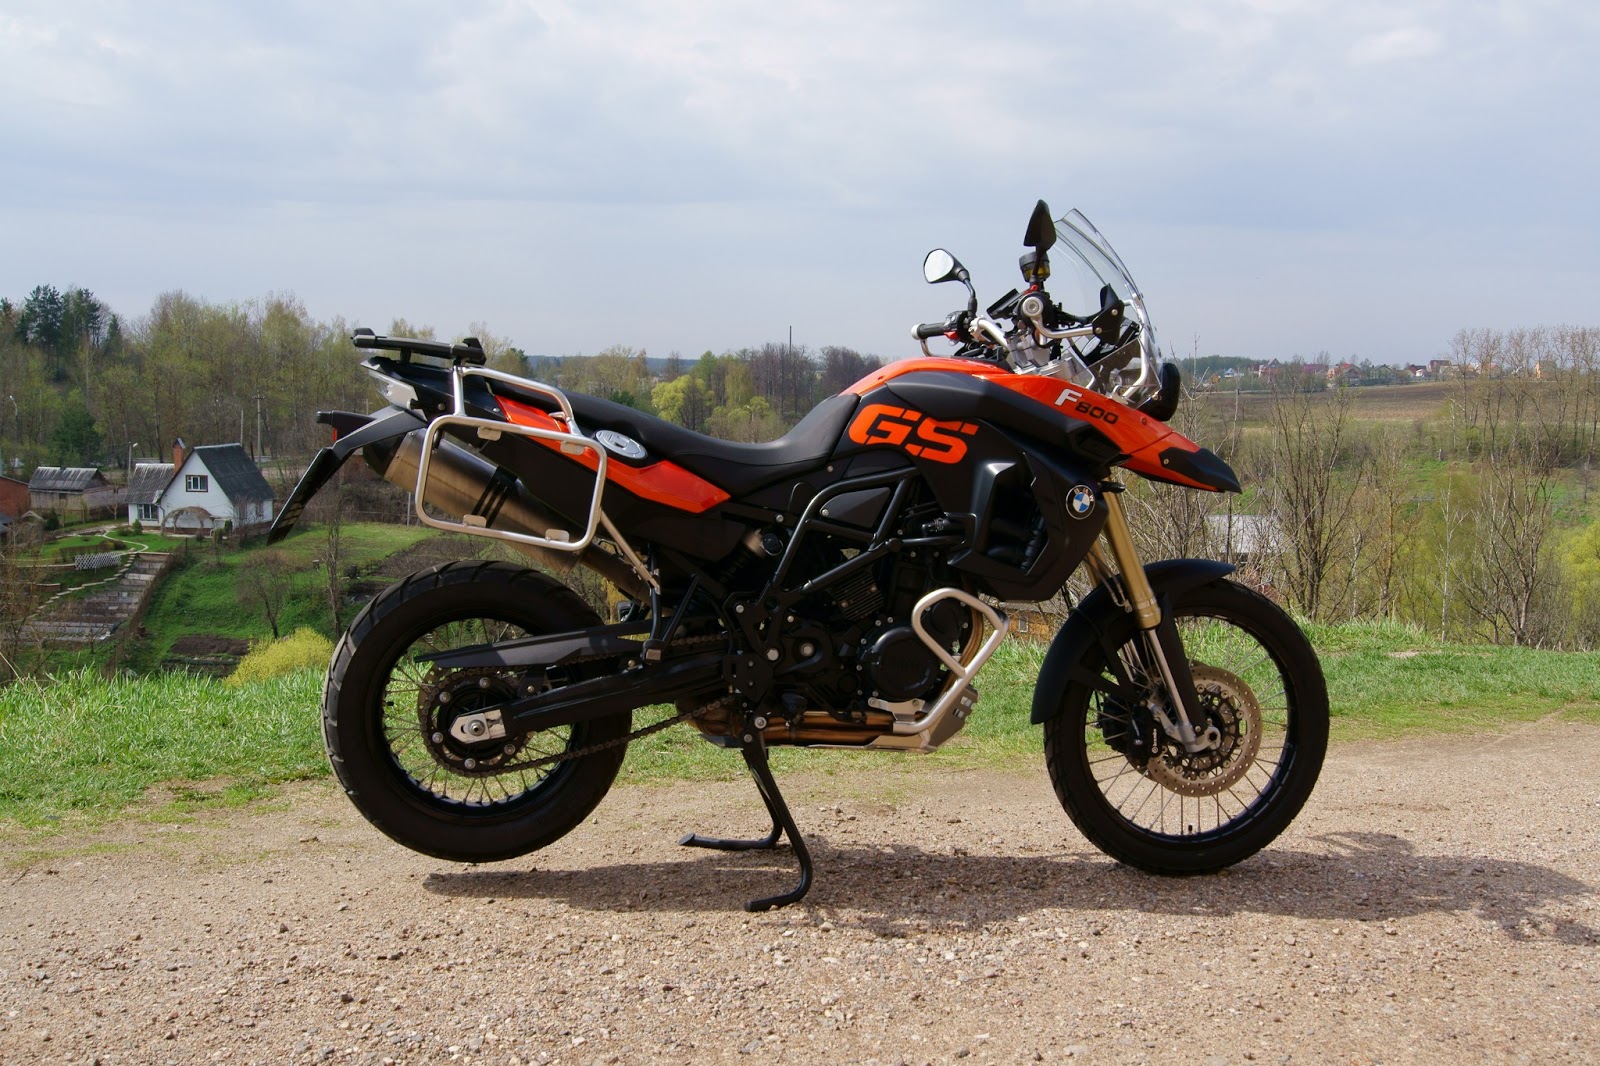 BMW F800 GS | HD Wallpapers (High Definition)|HDwalle